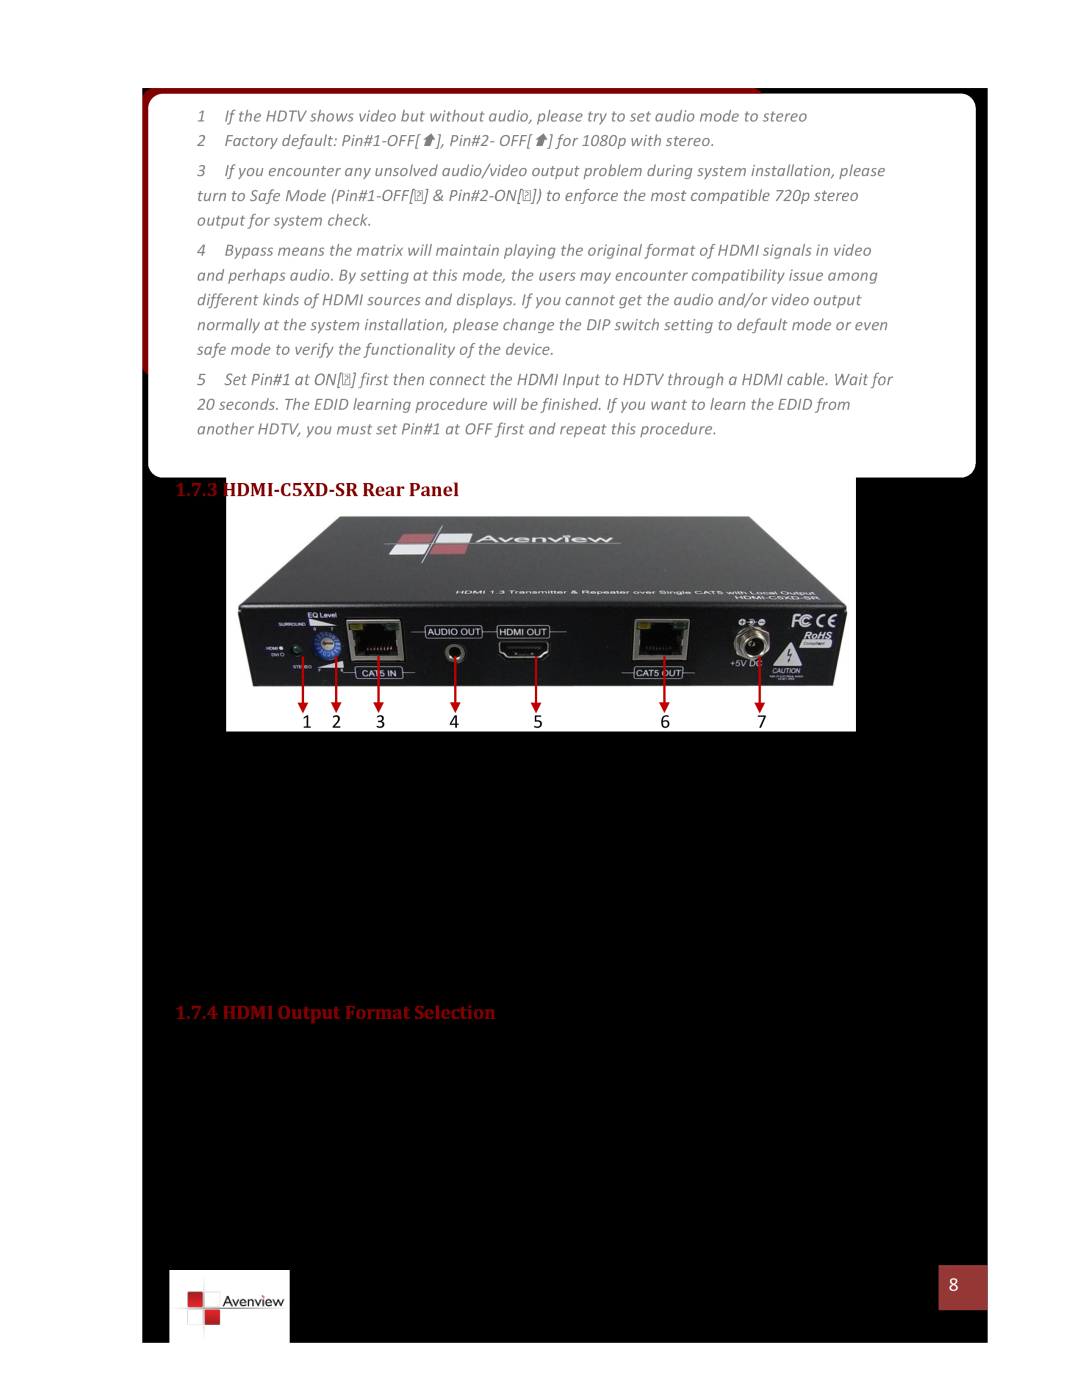 Avenview specifications HDMI-C5XD-SR Rear Panel, HDMI Output Format Selection, Power Connector 5V 4A DC, Hdmi Out 